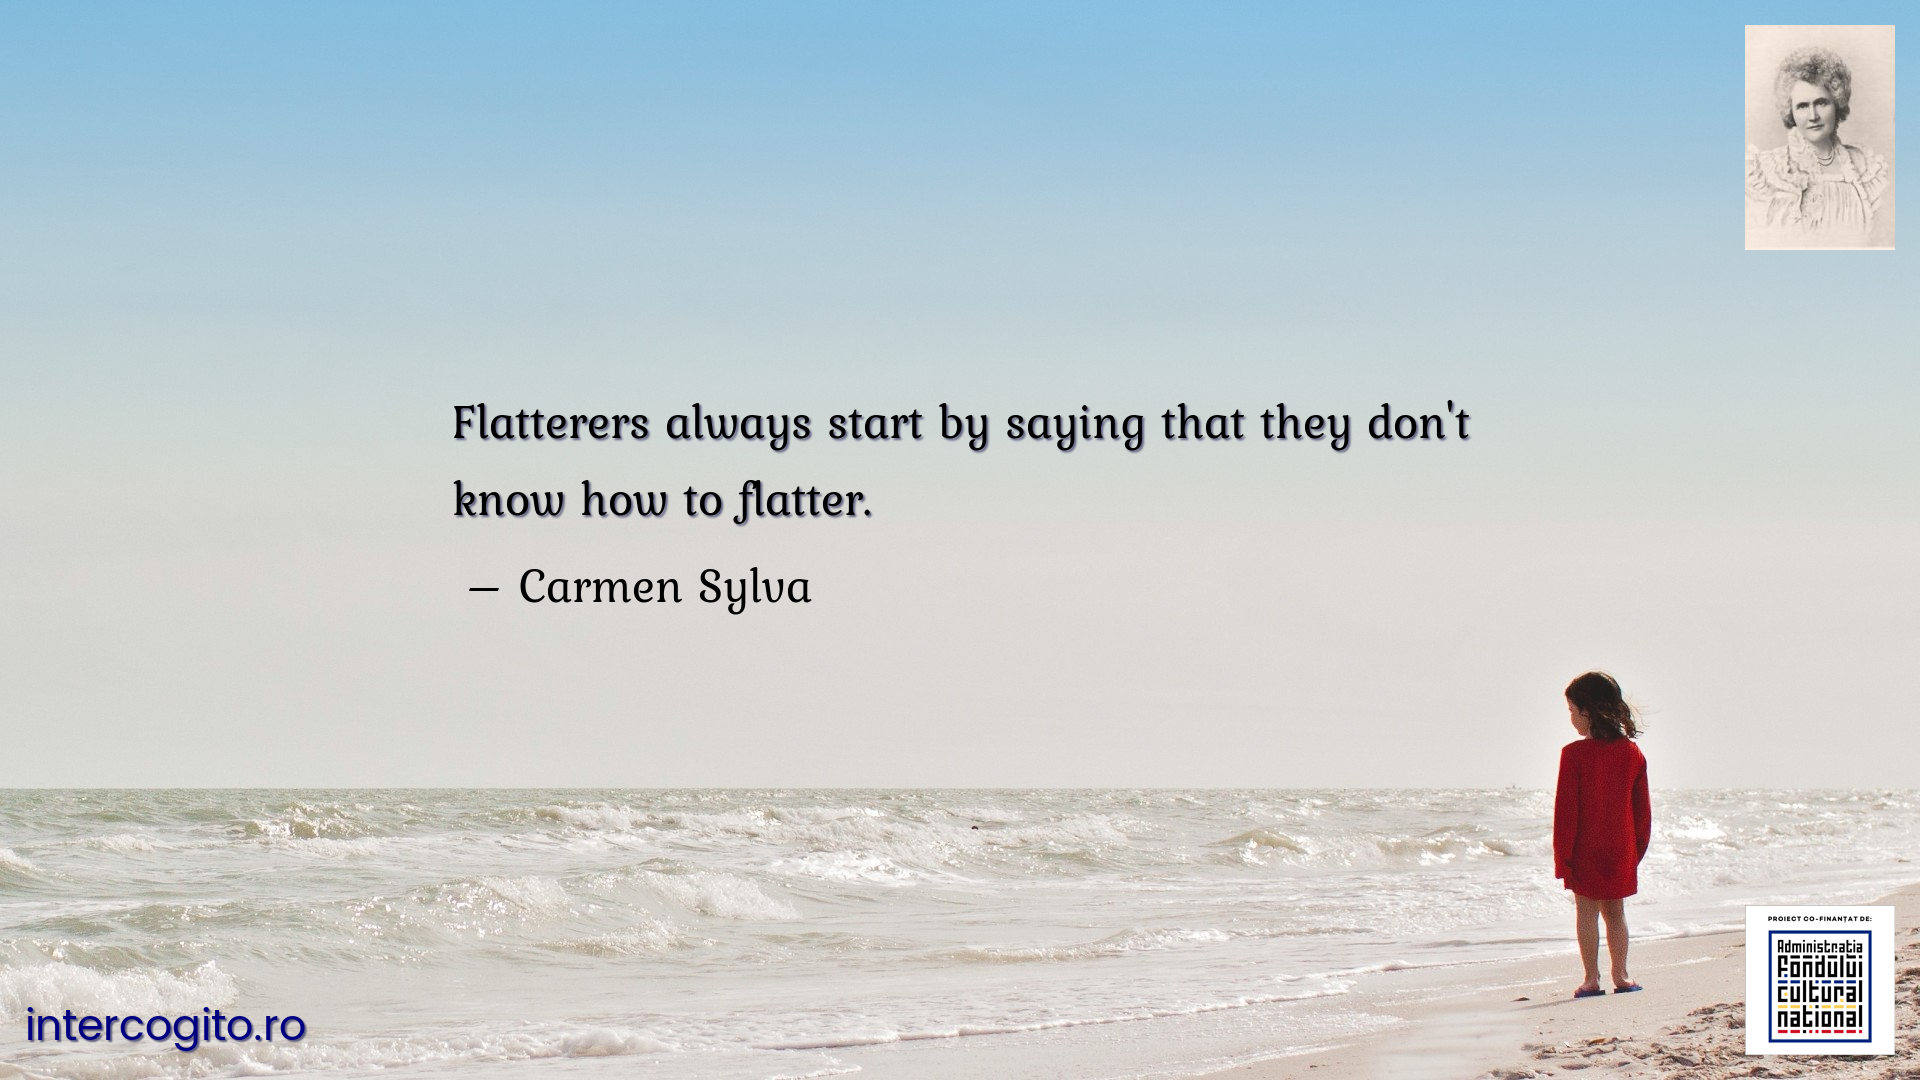 Flatterers always start by saying that they don't know how to flatter.